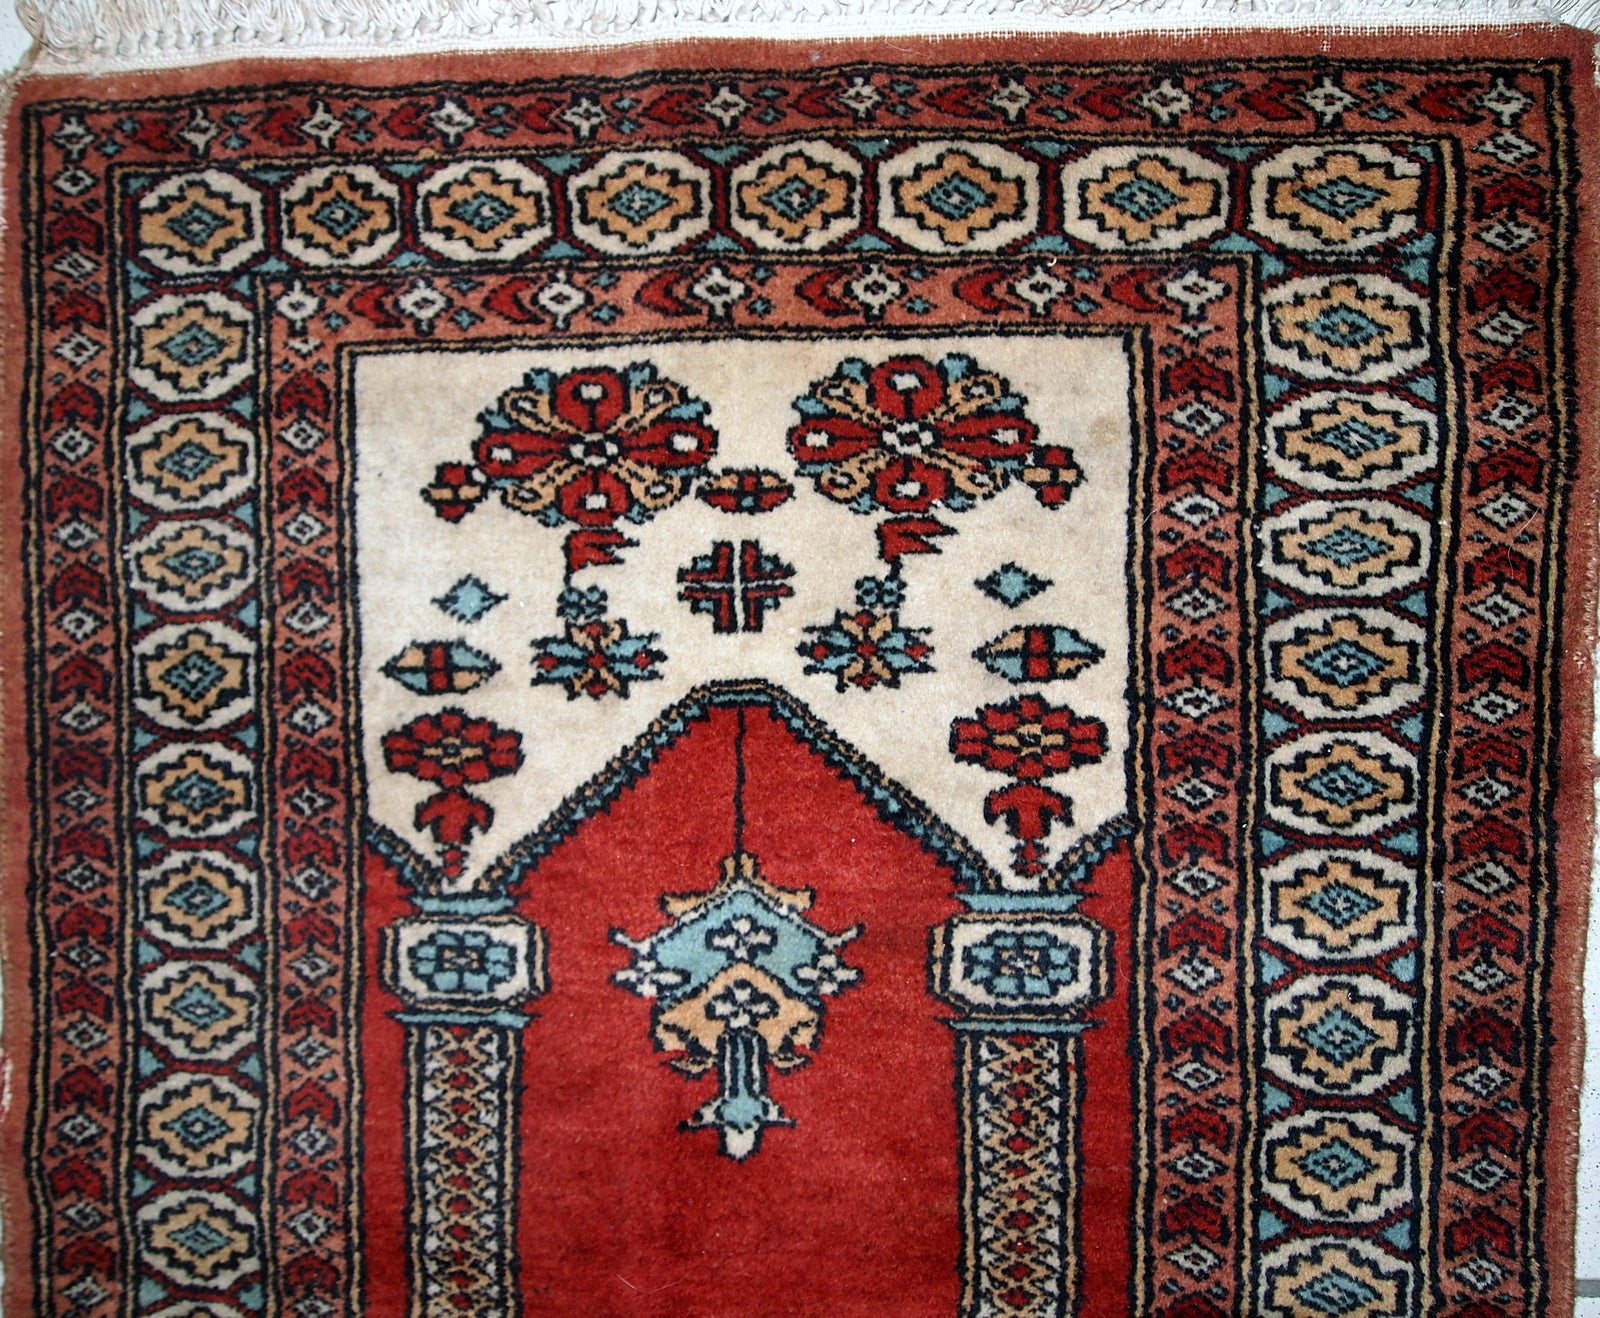 Handmade vintage prayer Pakistani Lahore rug in original good condition. The rug is in bright shade of red and beautiful decorative border.